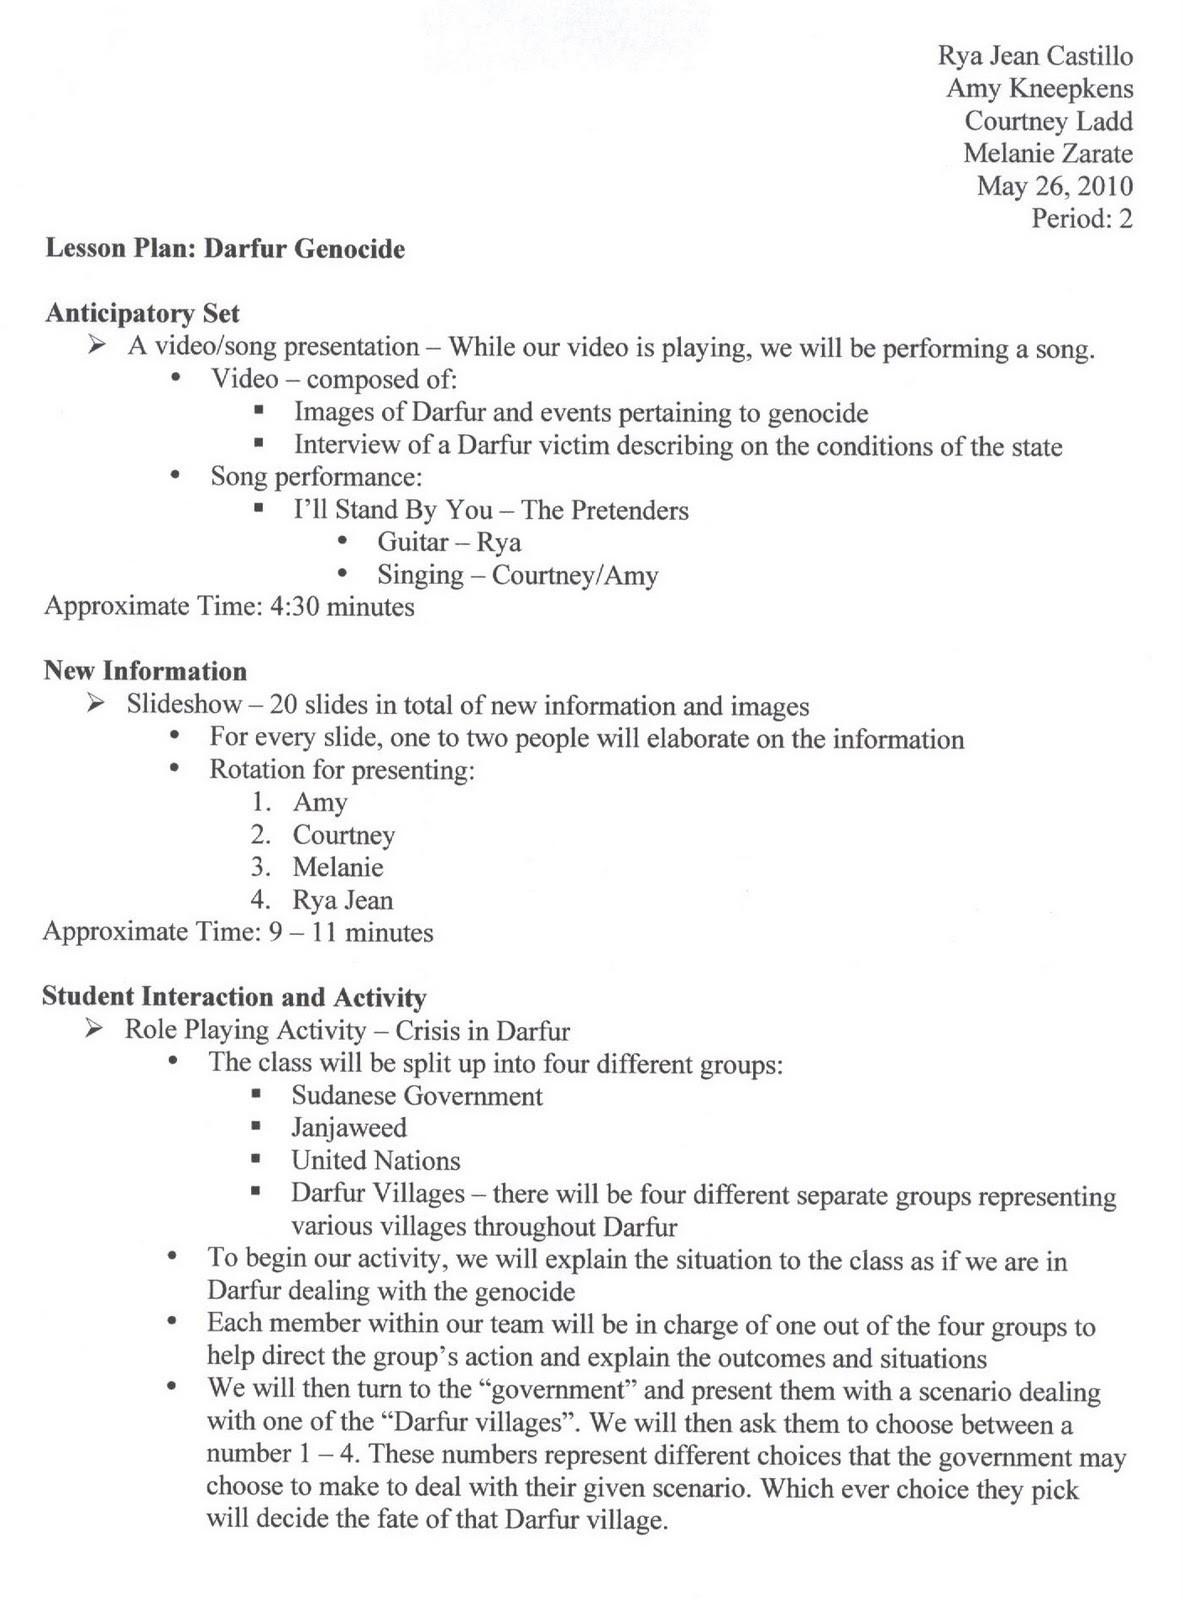 Anticipatory Set Lesson Plan Lesson Plan Template Anticipatory Set 3 Things You Should